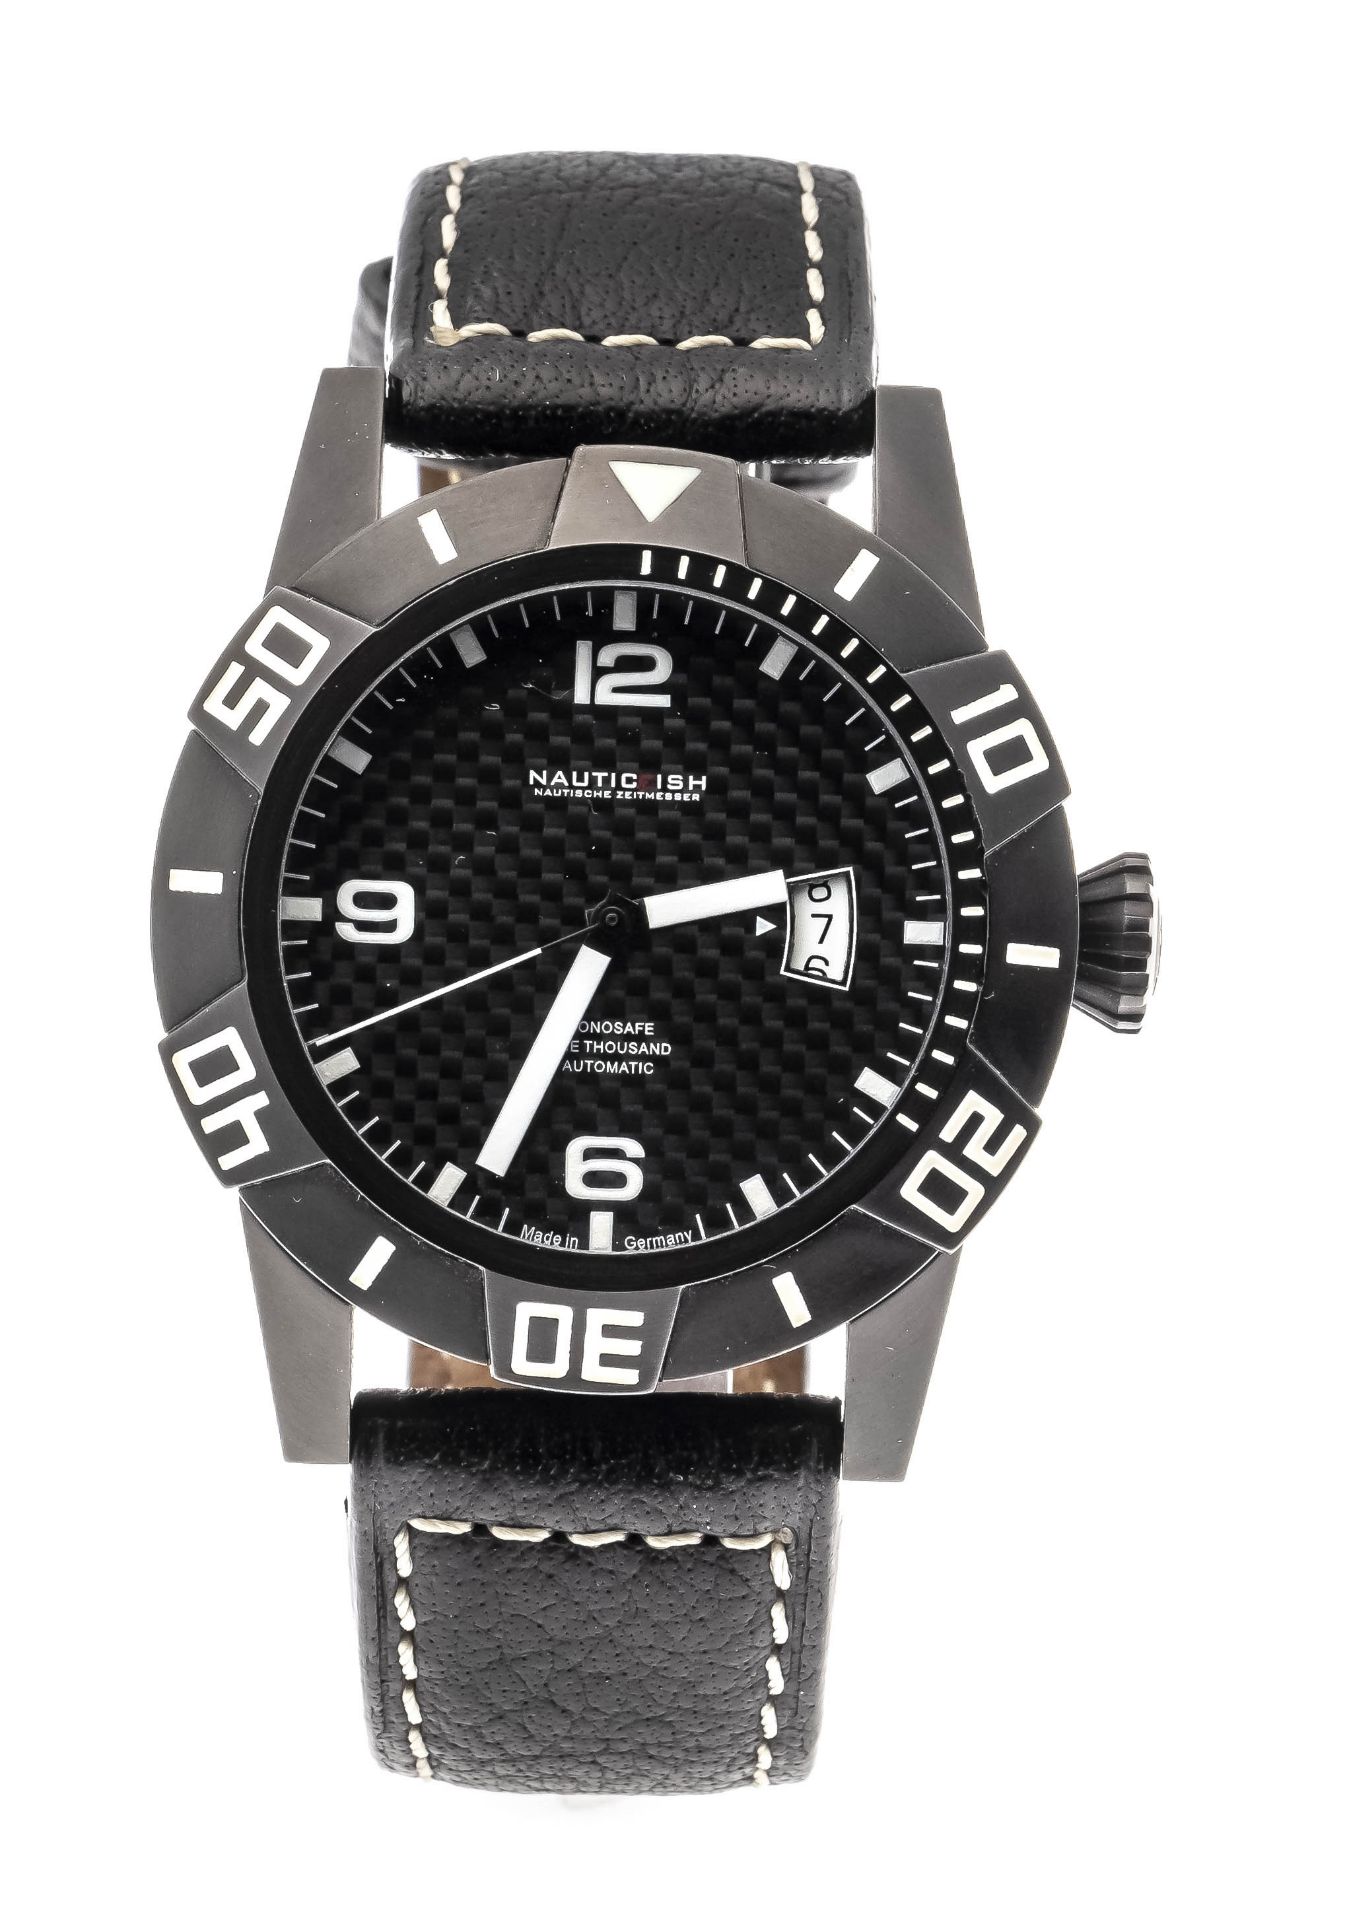 Nauticfish men's diver's watch, Ref. 07/22F/02, registration number 0432 from 2009, 1000m WD,